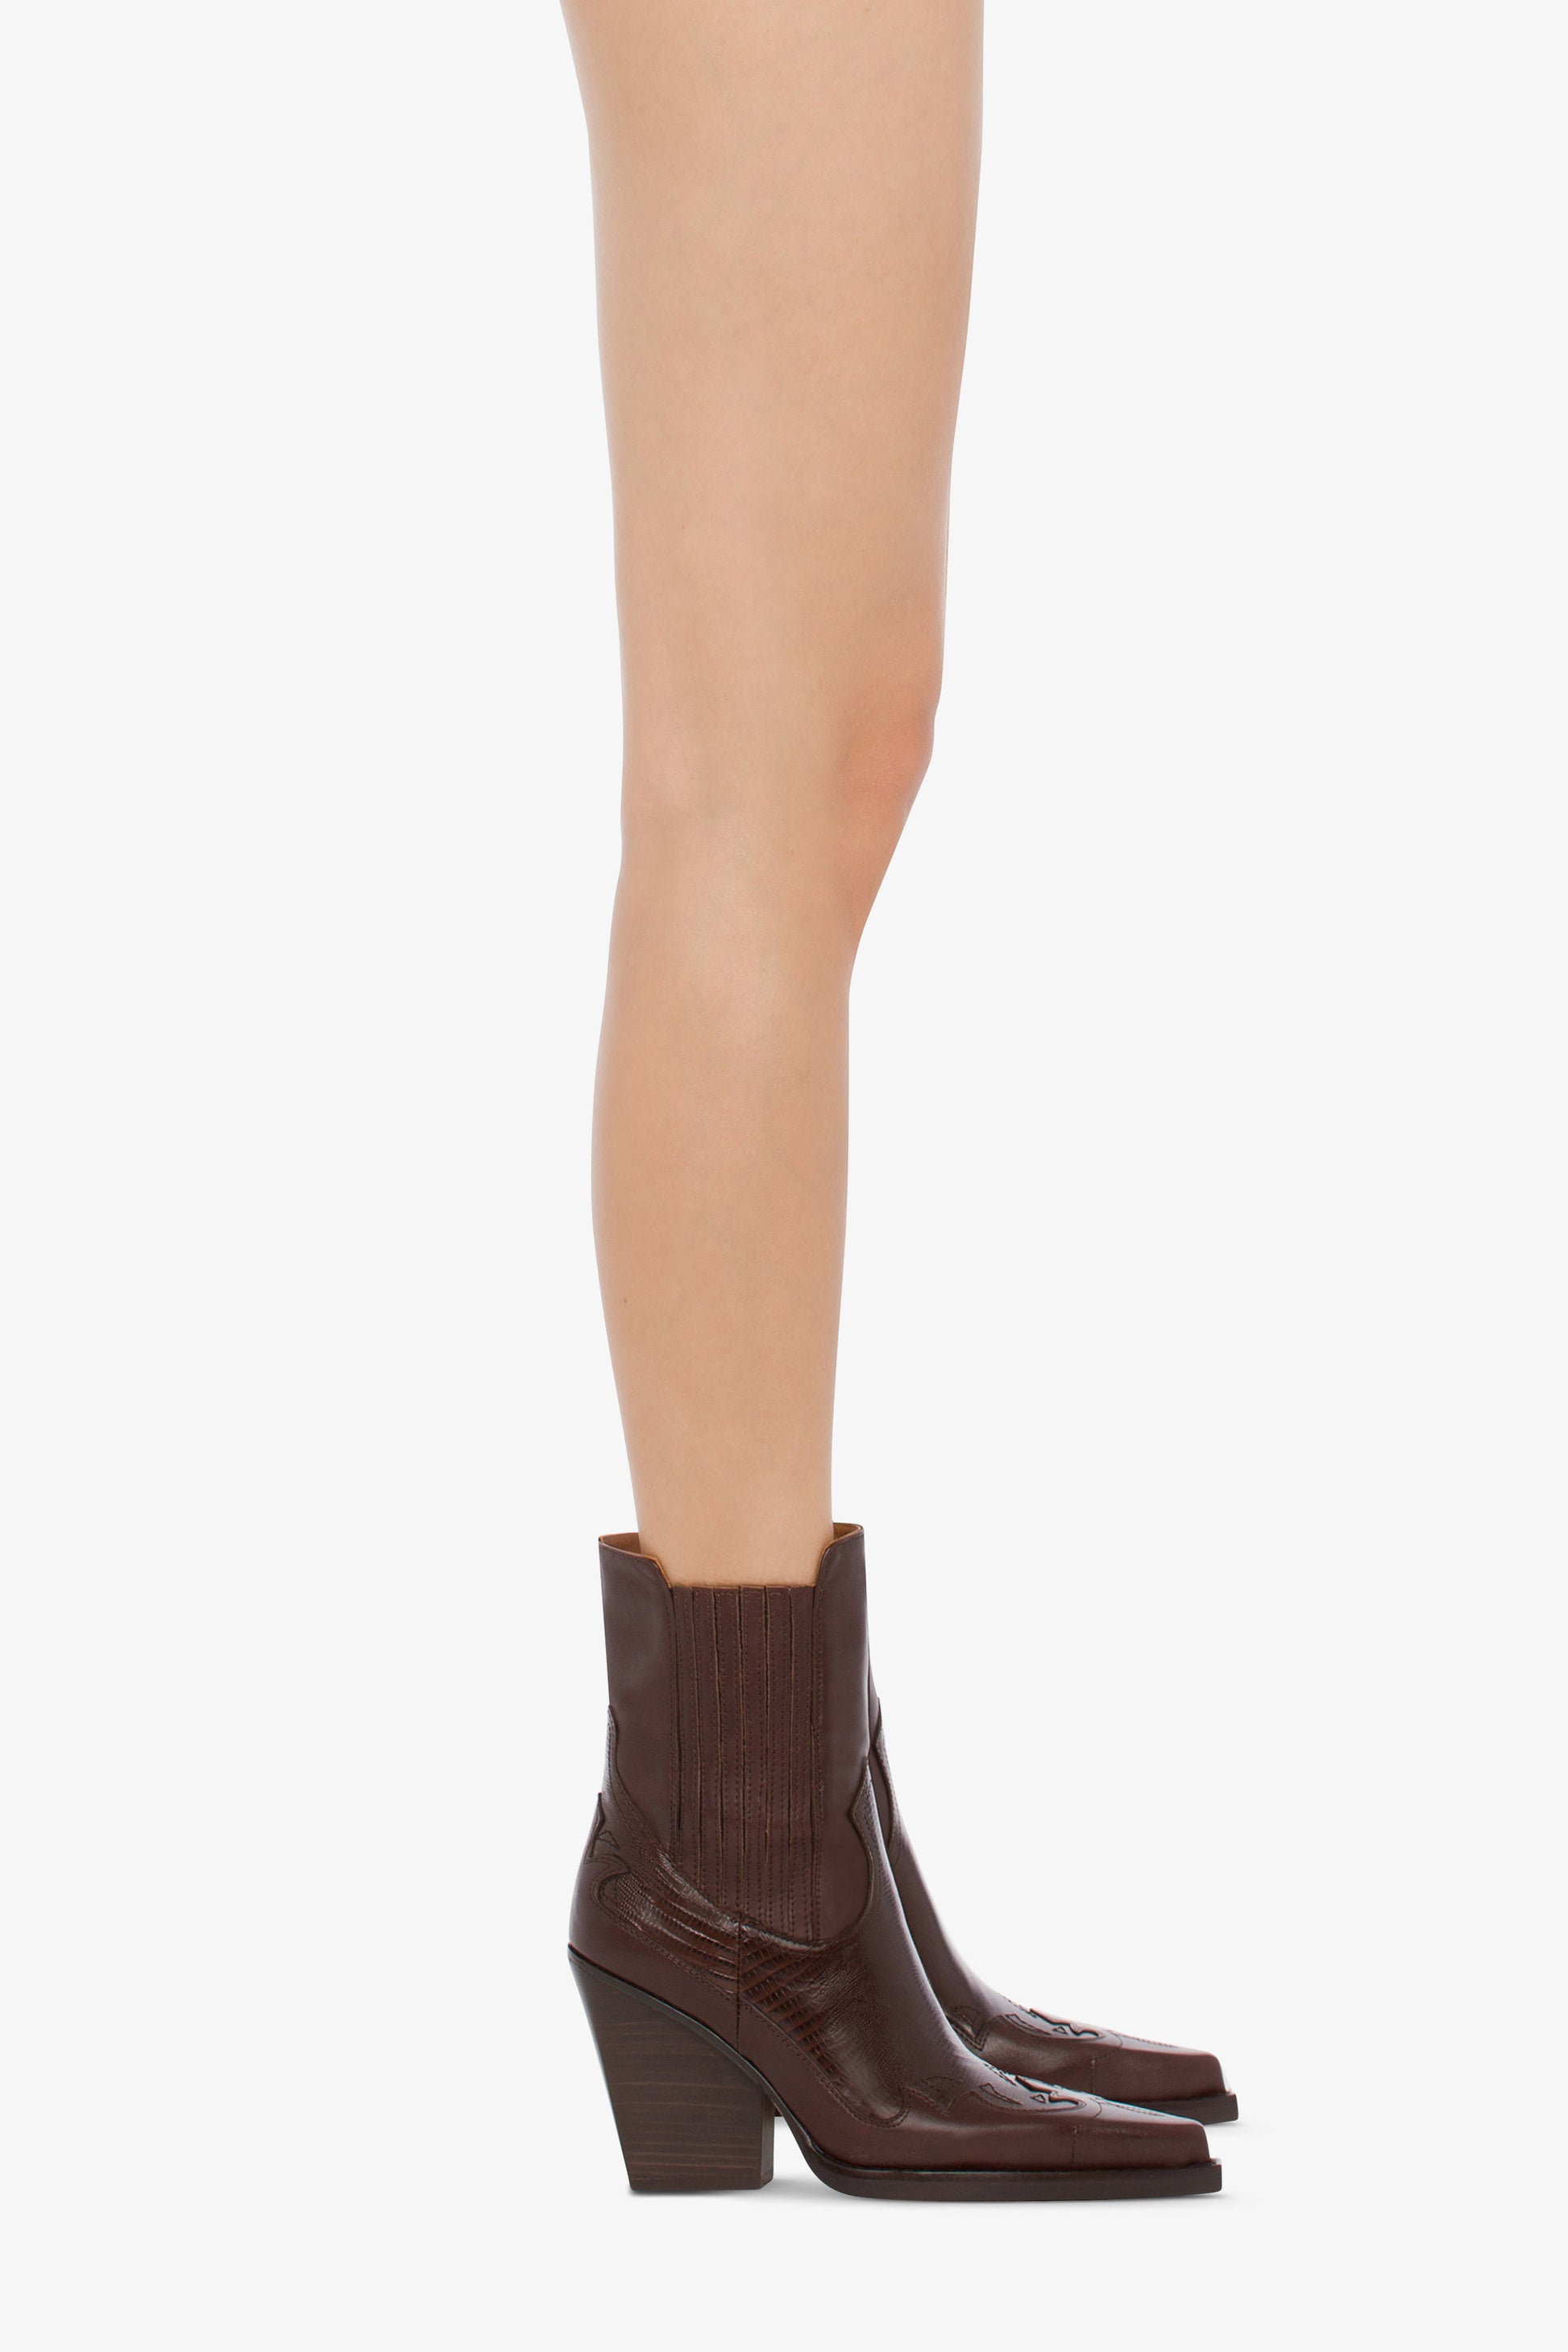 Pointed ankle boots in chocolate and mocha lizard-printed leather - Indossato